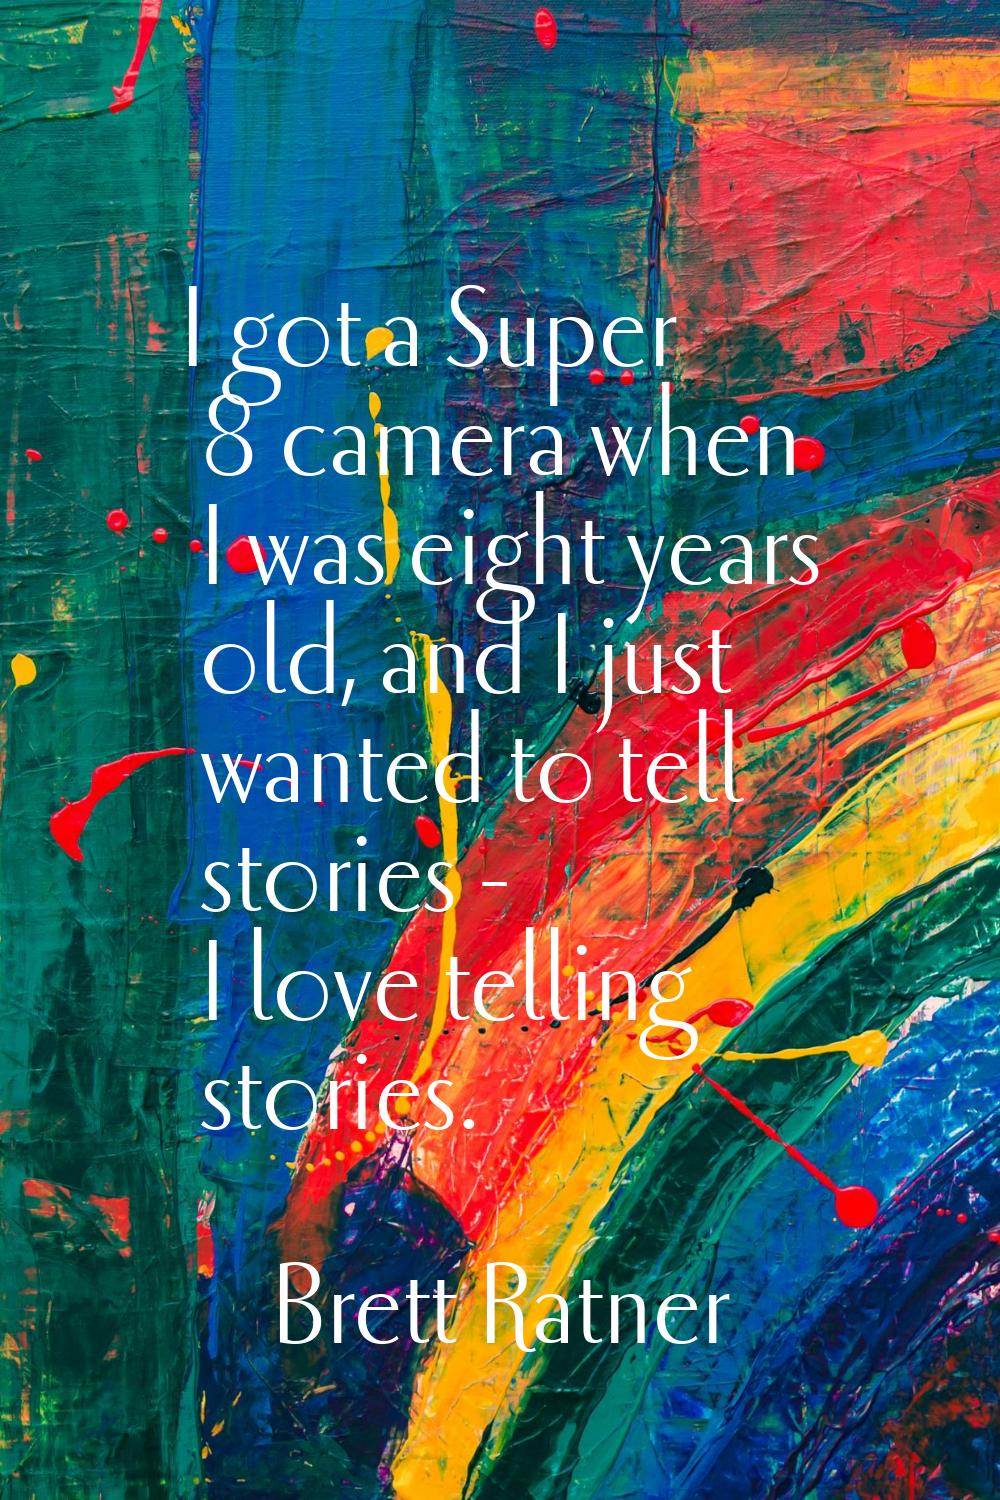 I got a Super 8 camera when I was eight years old, and I just wanted to tell stories - I love telli